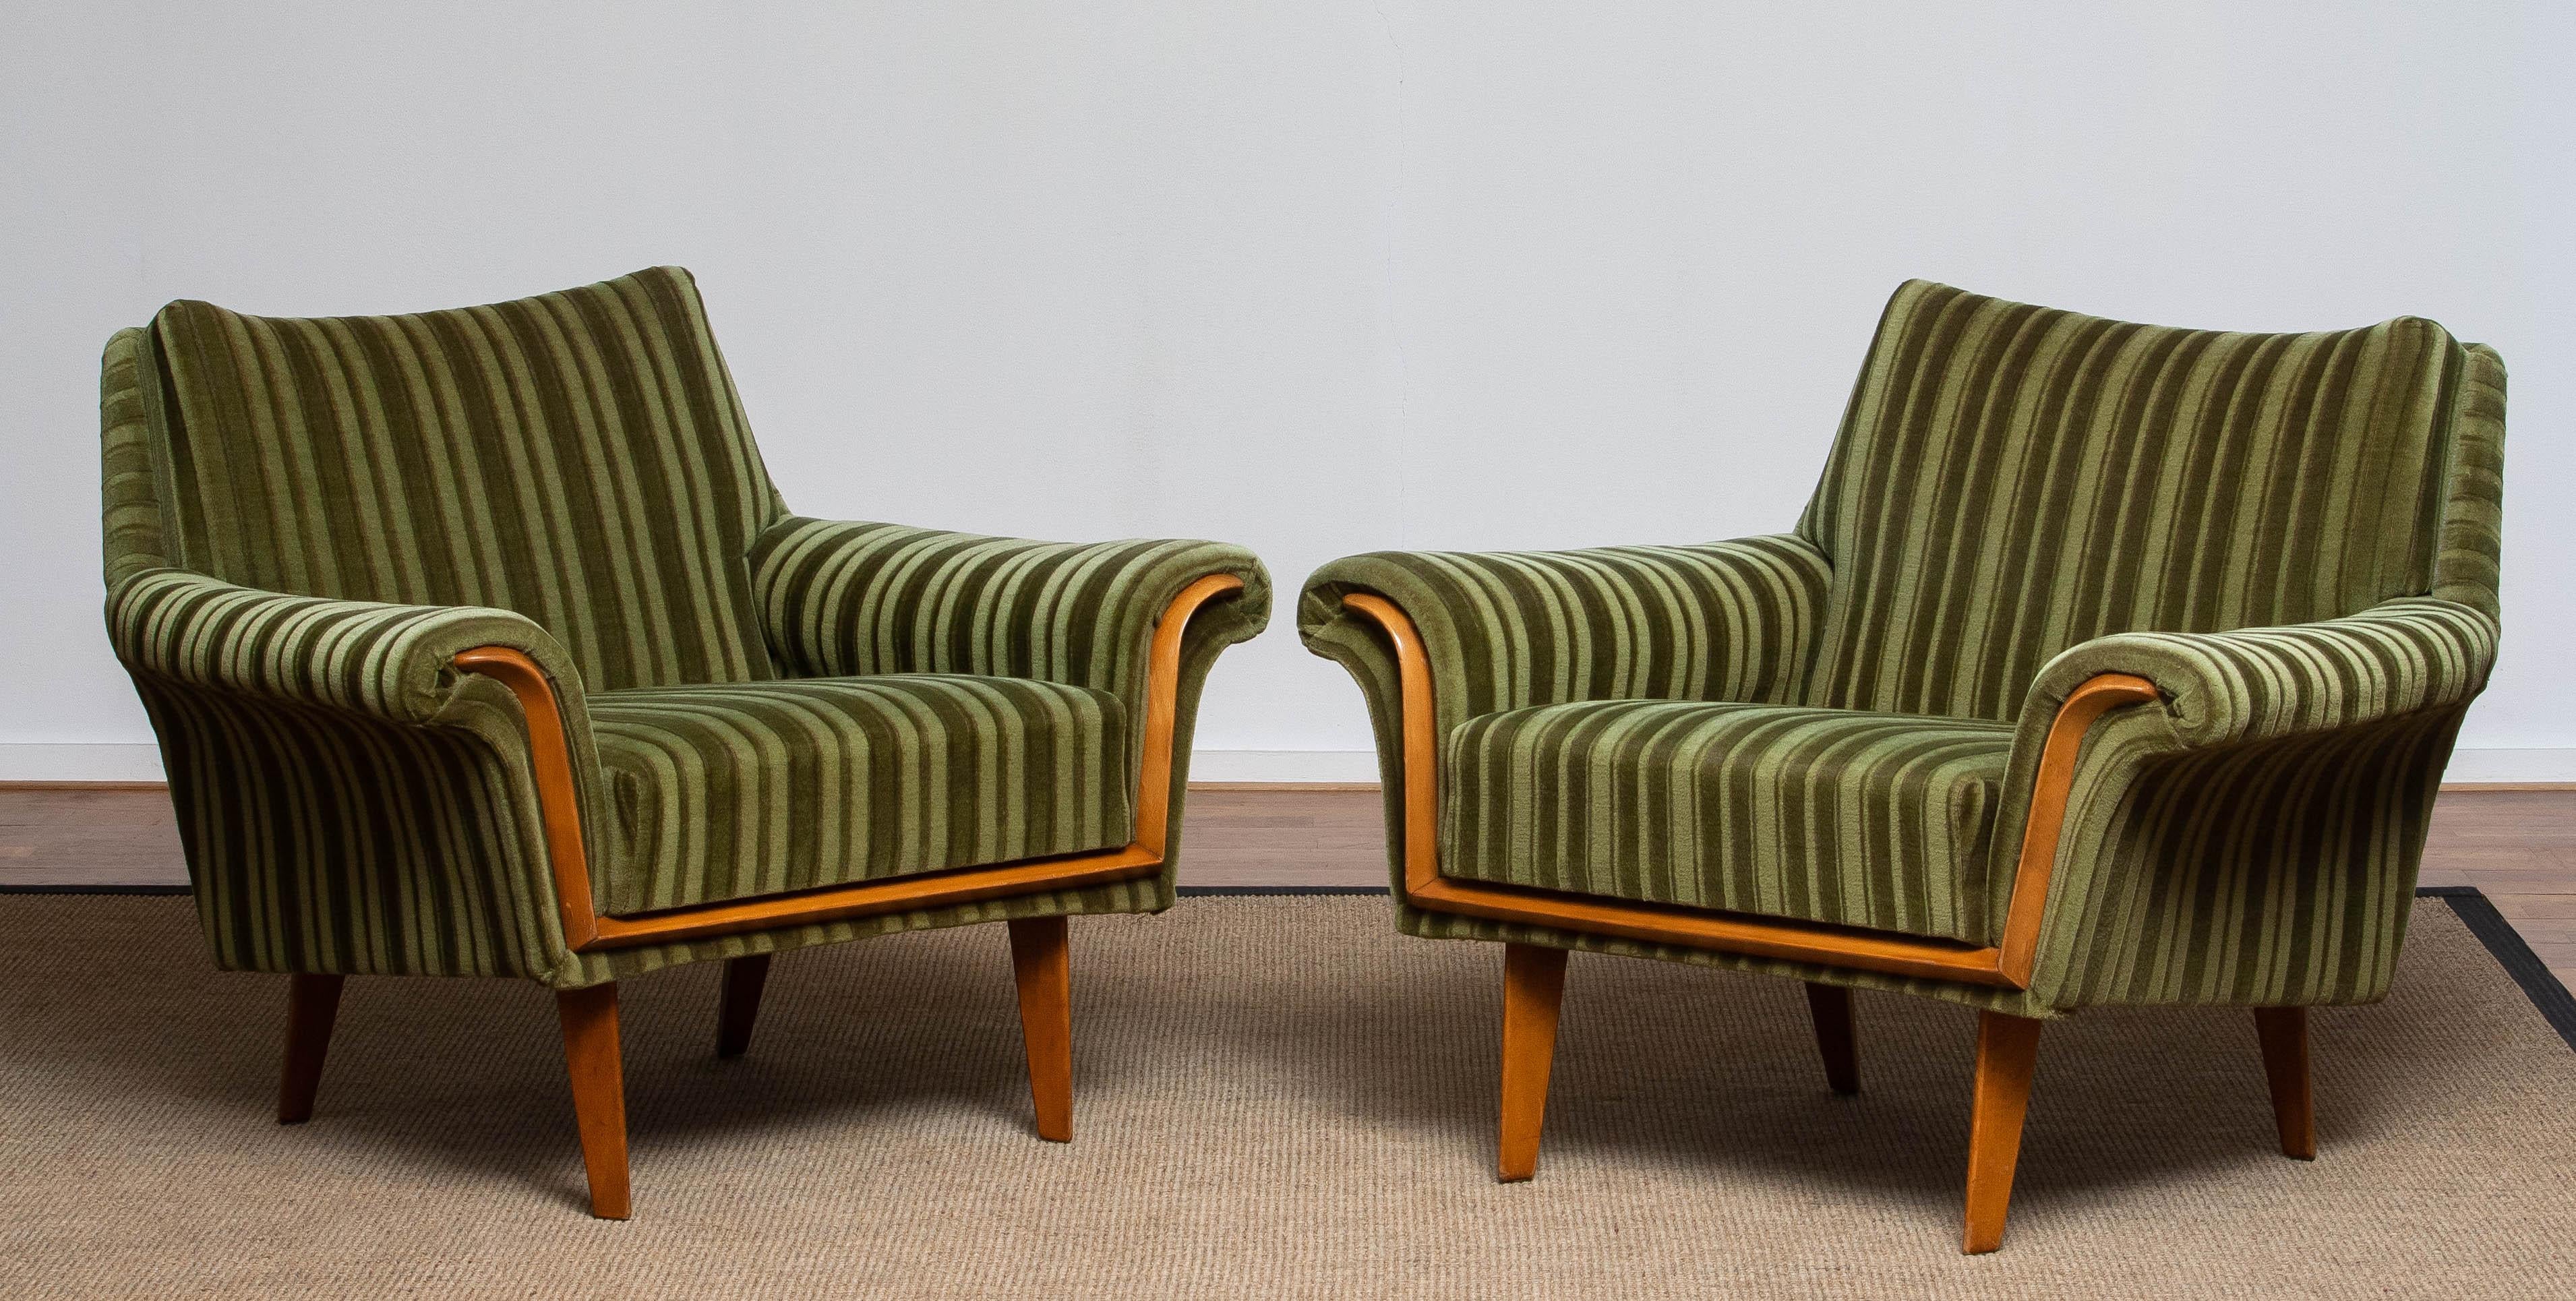 Absolutely stunning set of two lounge / easy / club chairs from the 1950's made in Italy stil upholstered with the original green velvet / velours fabric. Supports good and sits very comfortable.
Both are overall in very good condition.

Please